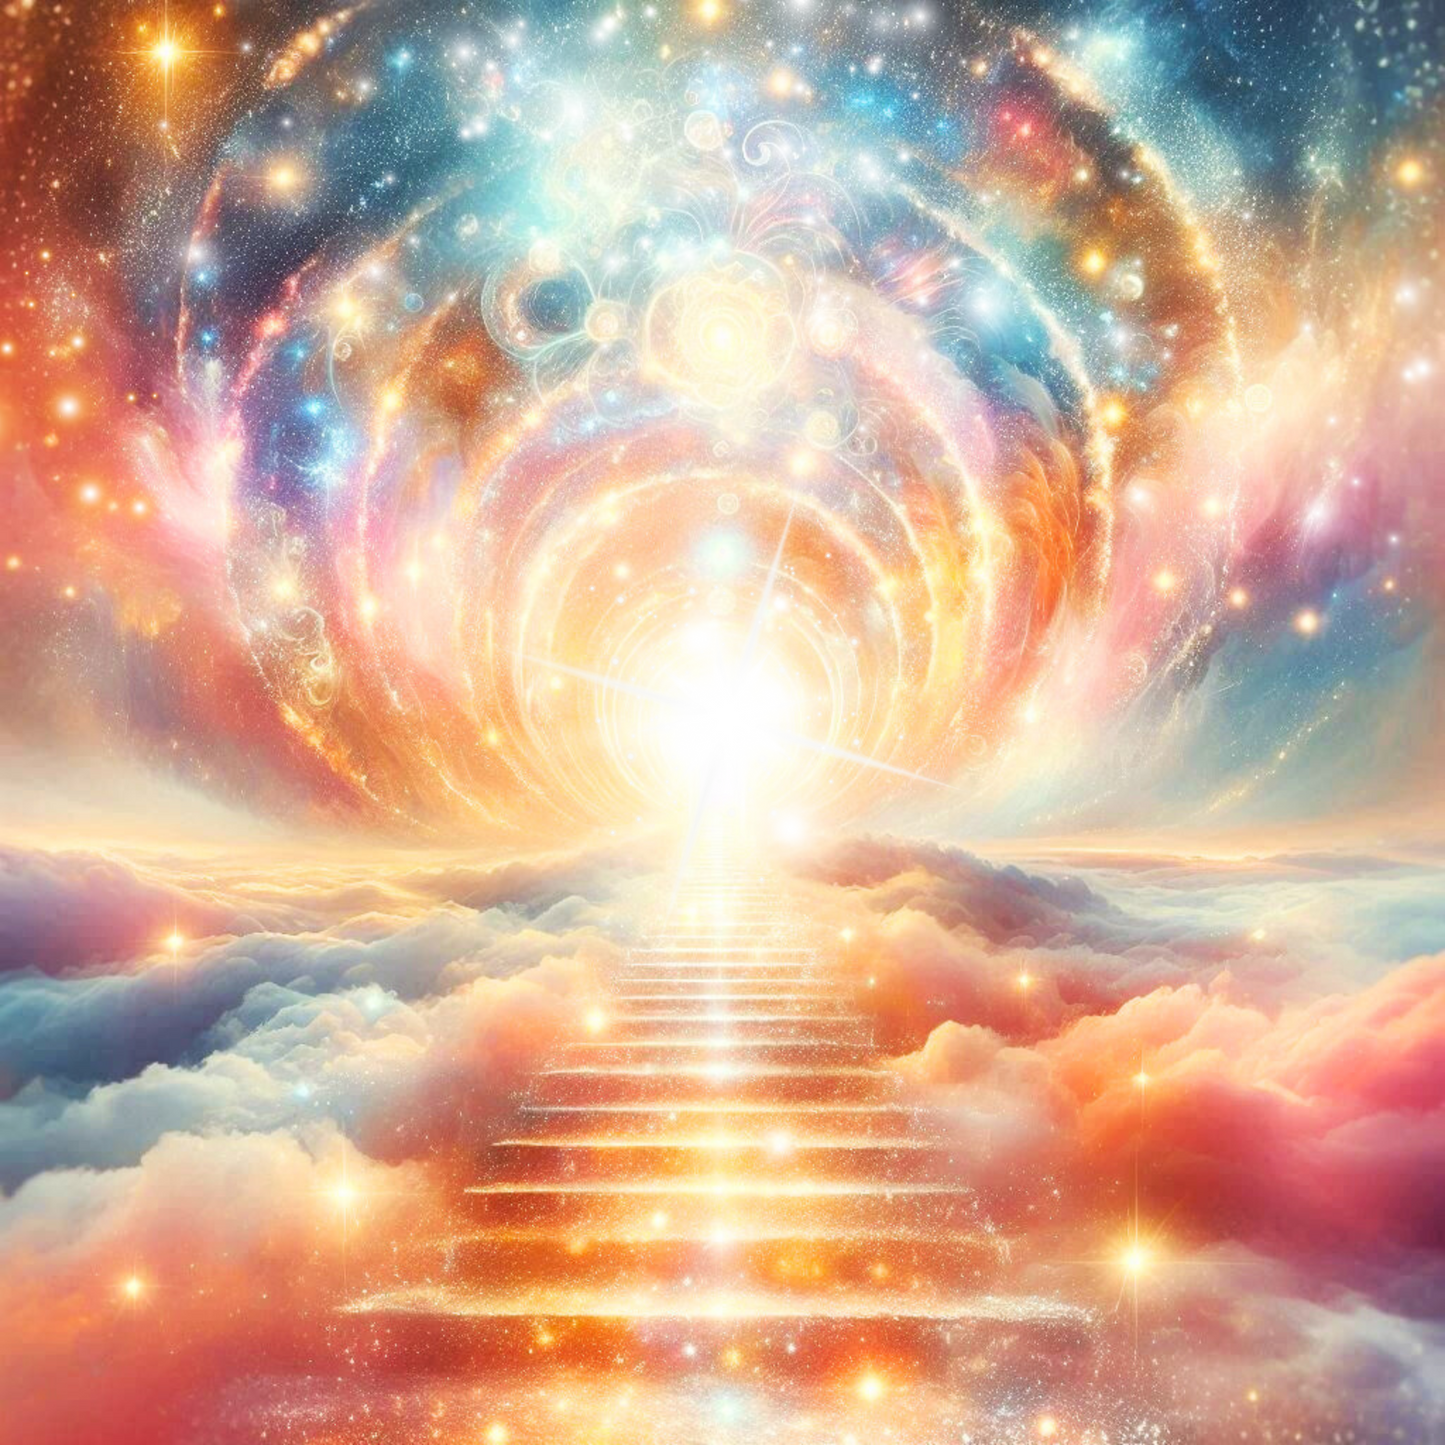 When the soul awakens - Eight steps to the 5th dimension - Mini course - 59 min.